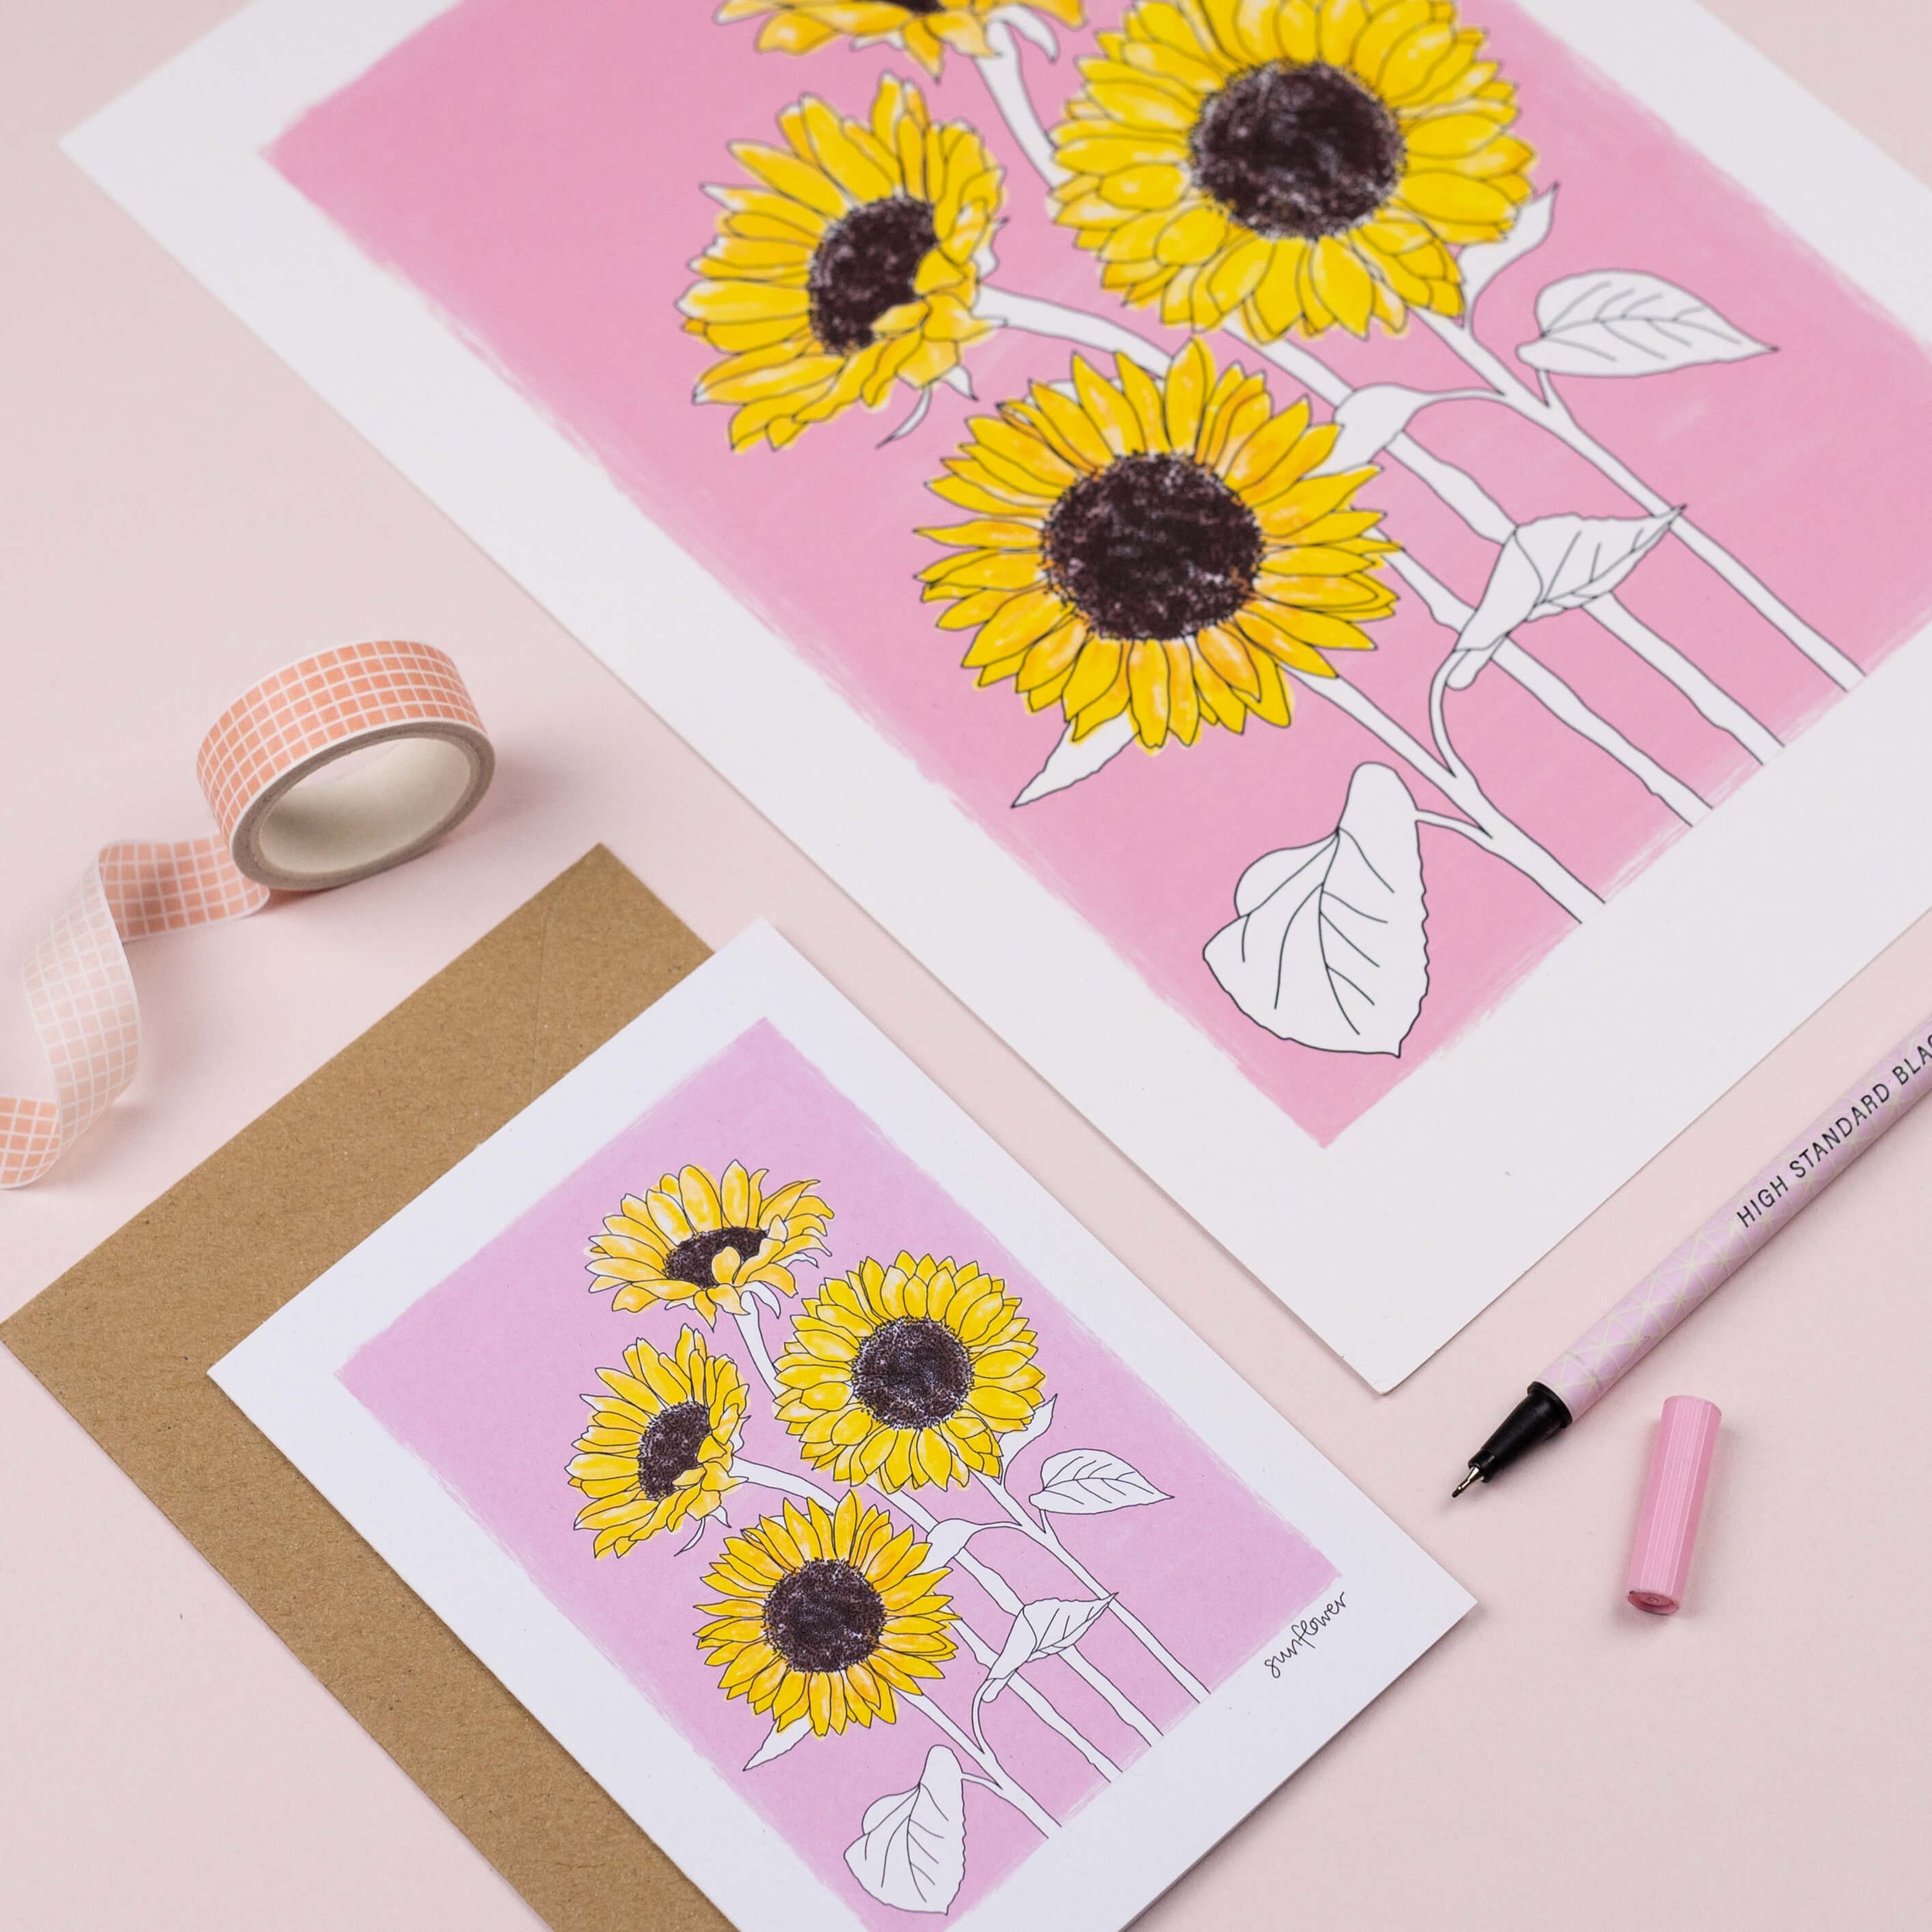 Sunflower illustrated print and card.jpg